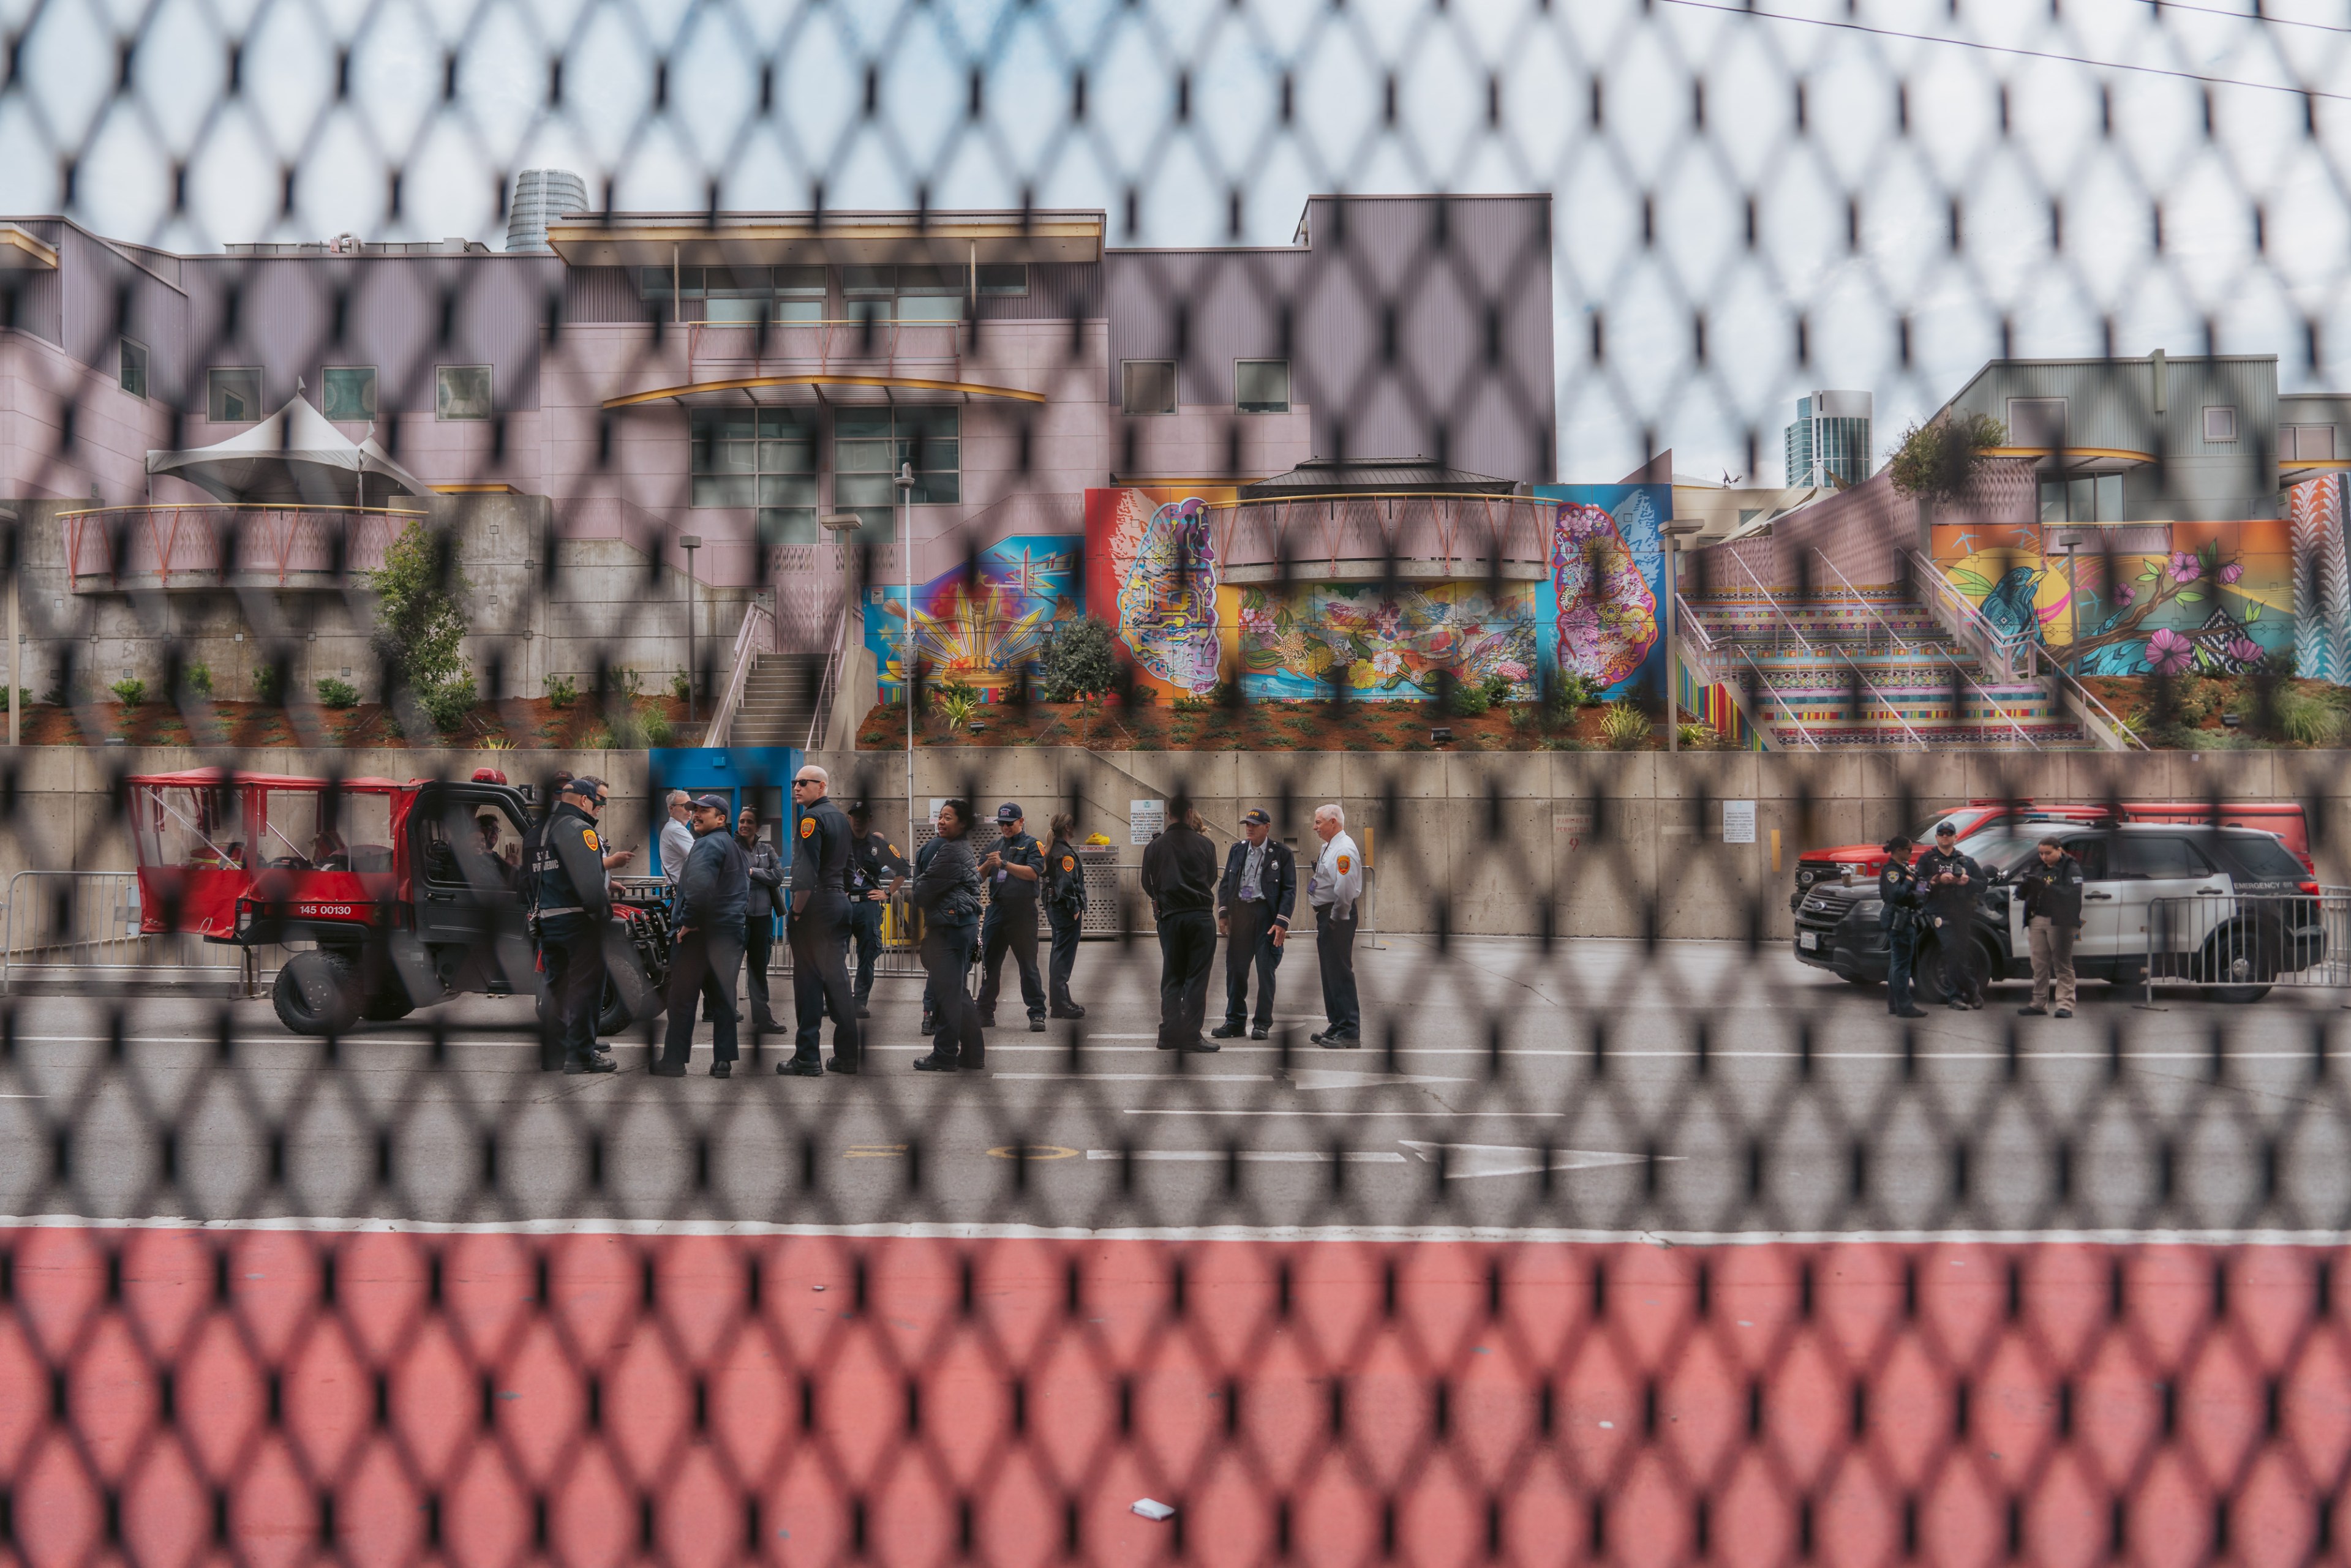 A group of police officers stands on a city street as seem through a metal fence.